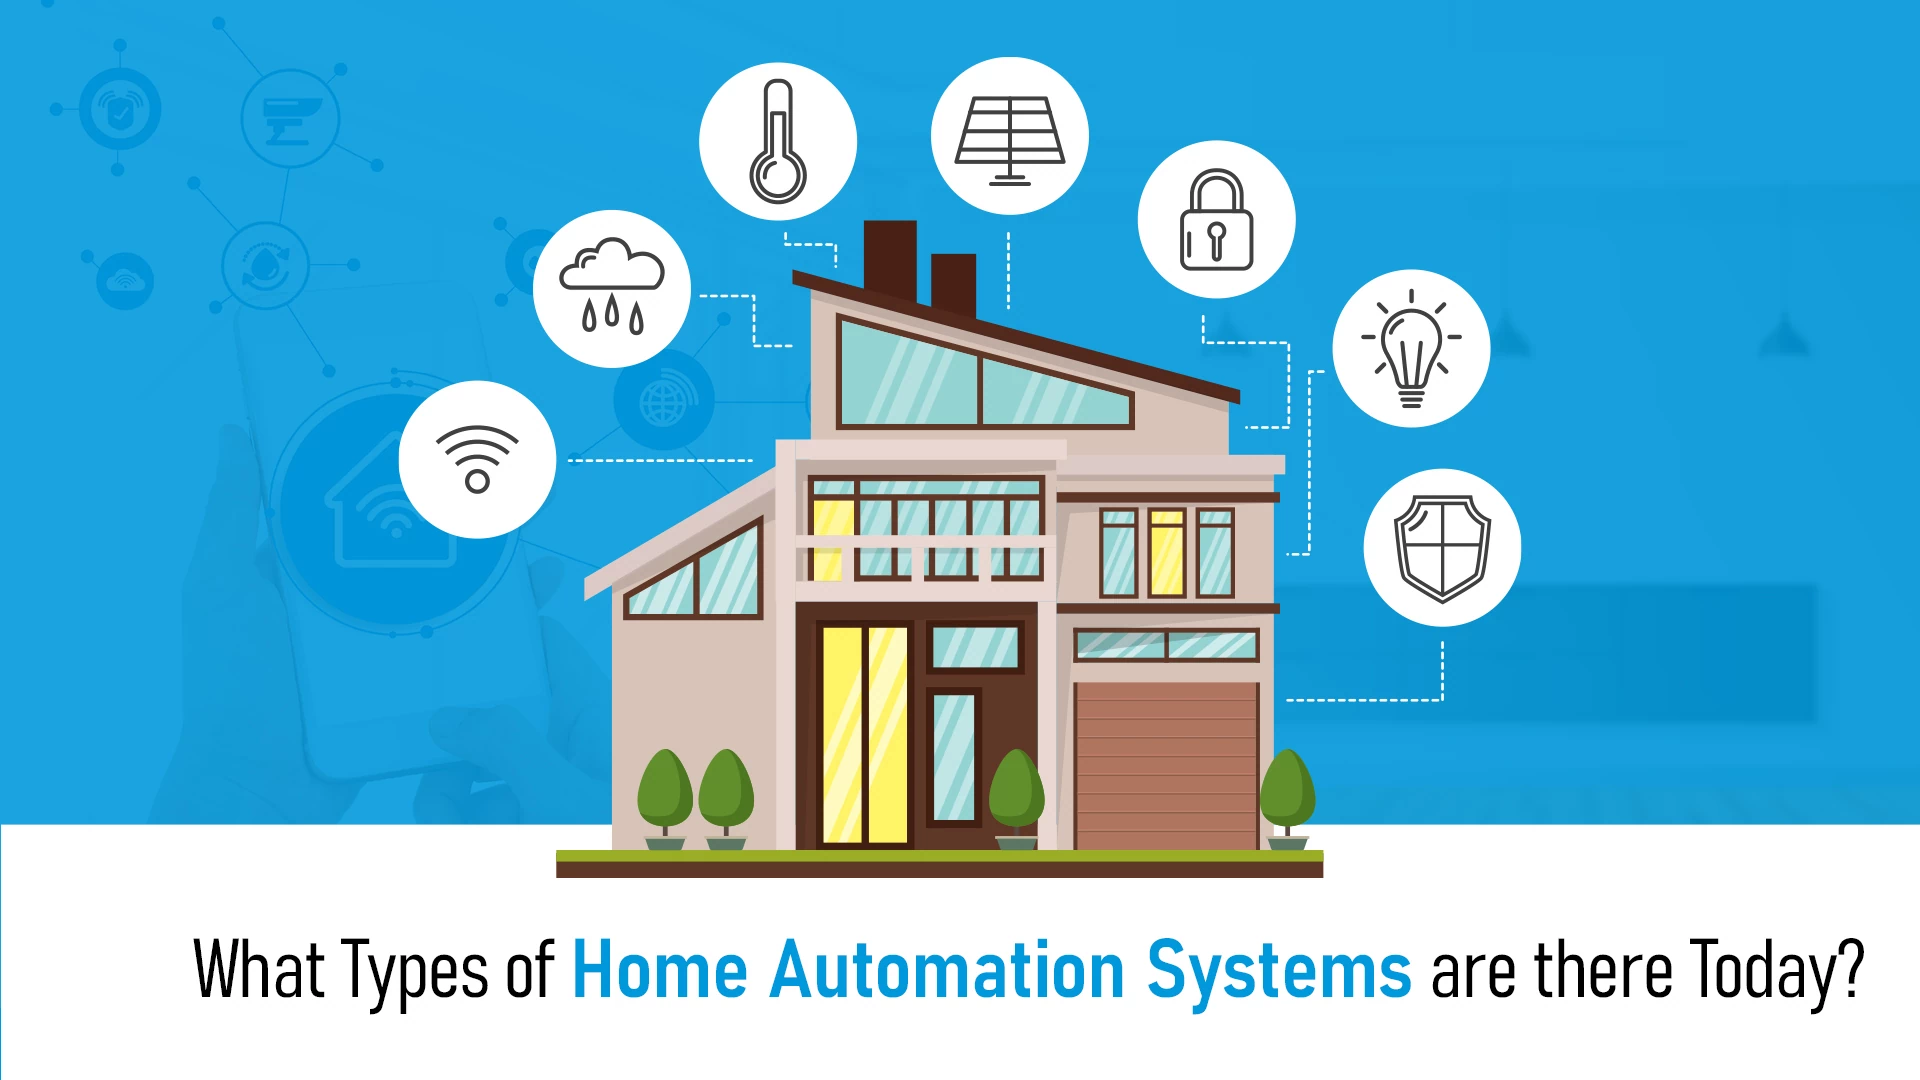 What Types of Home Automation Systems are there Today?